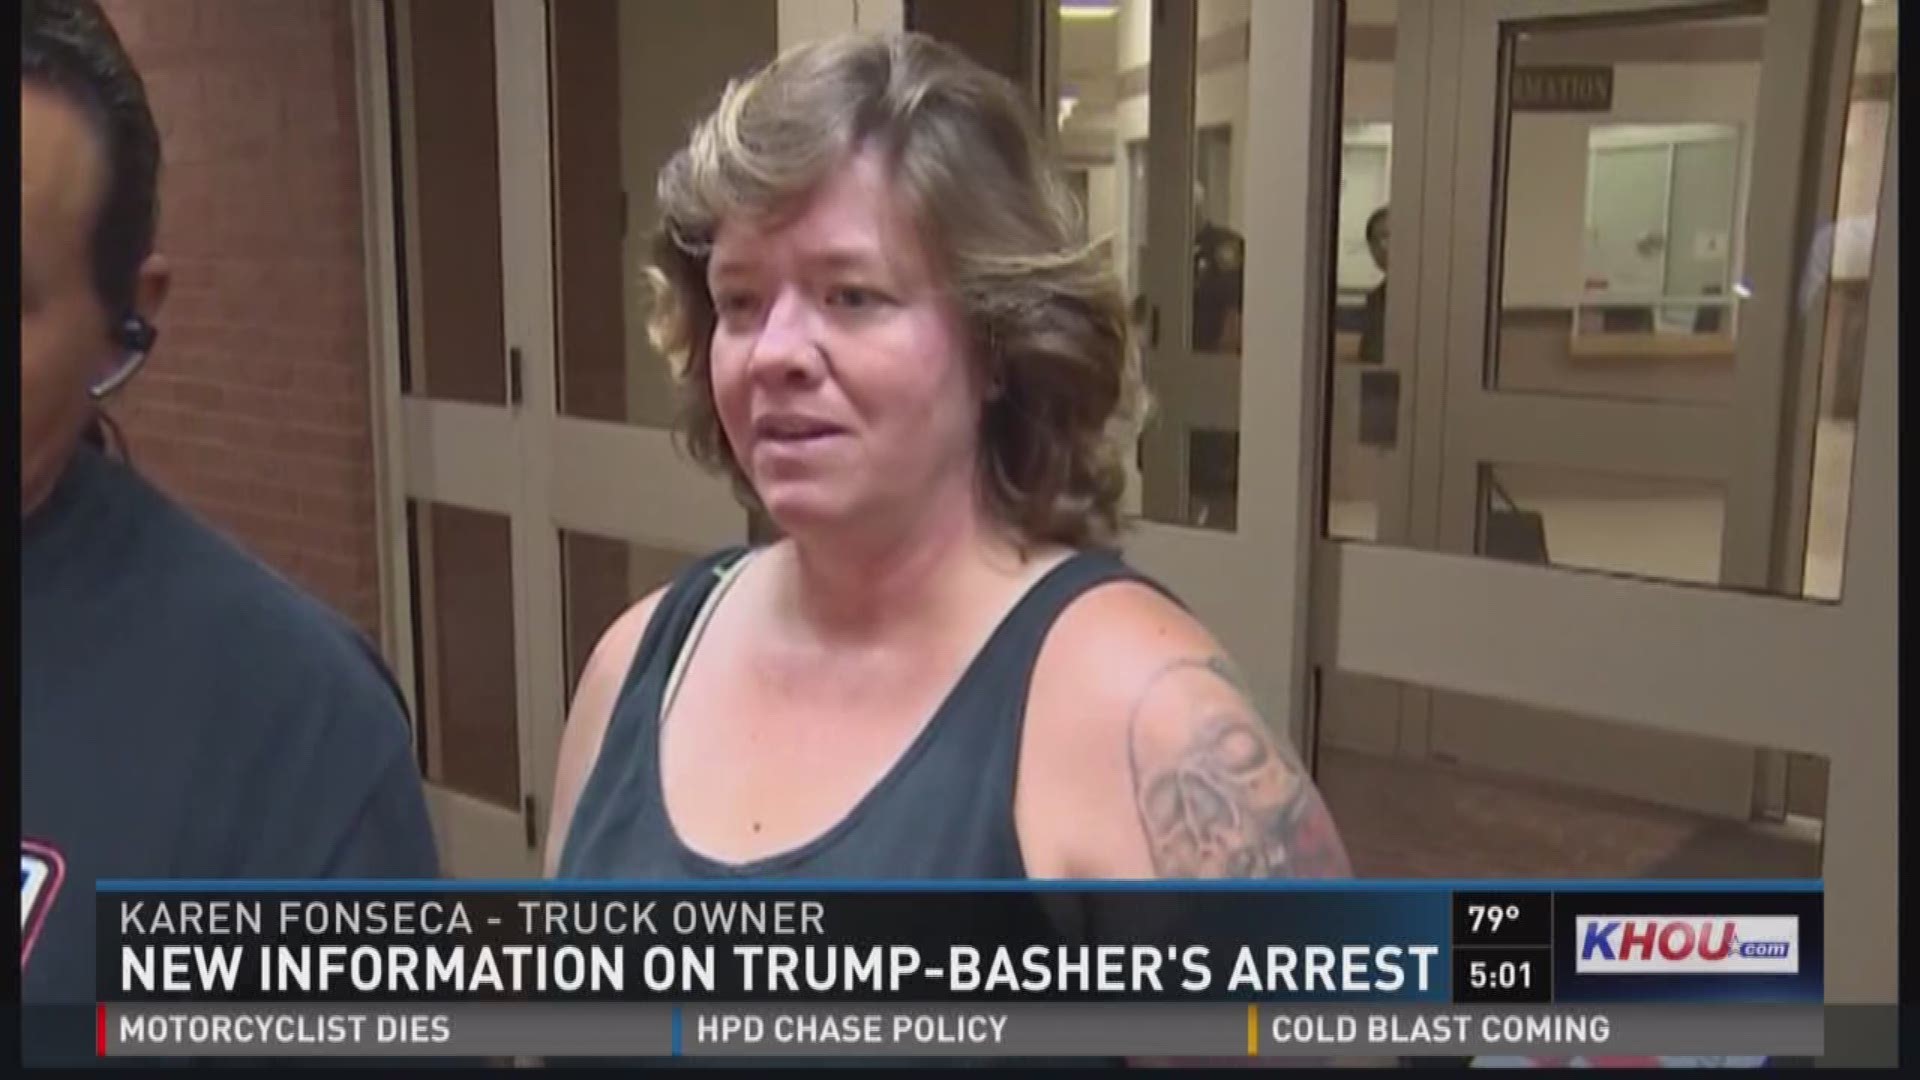 A Trump basher making news around the world ended up in jail Thursday night. Now we're getting new information about the arrest of Karen Fonseca and why it came the day after her "F__ k Trump" sticker was publicized. Fort Bend County Sheriff Troy Nehls' o